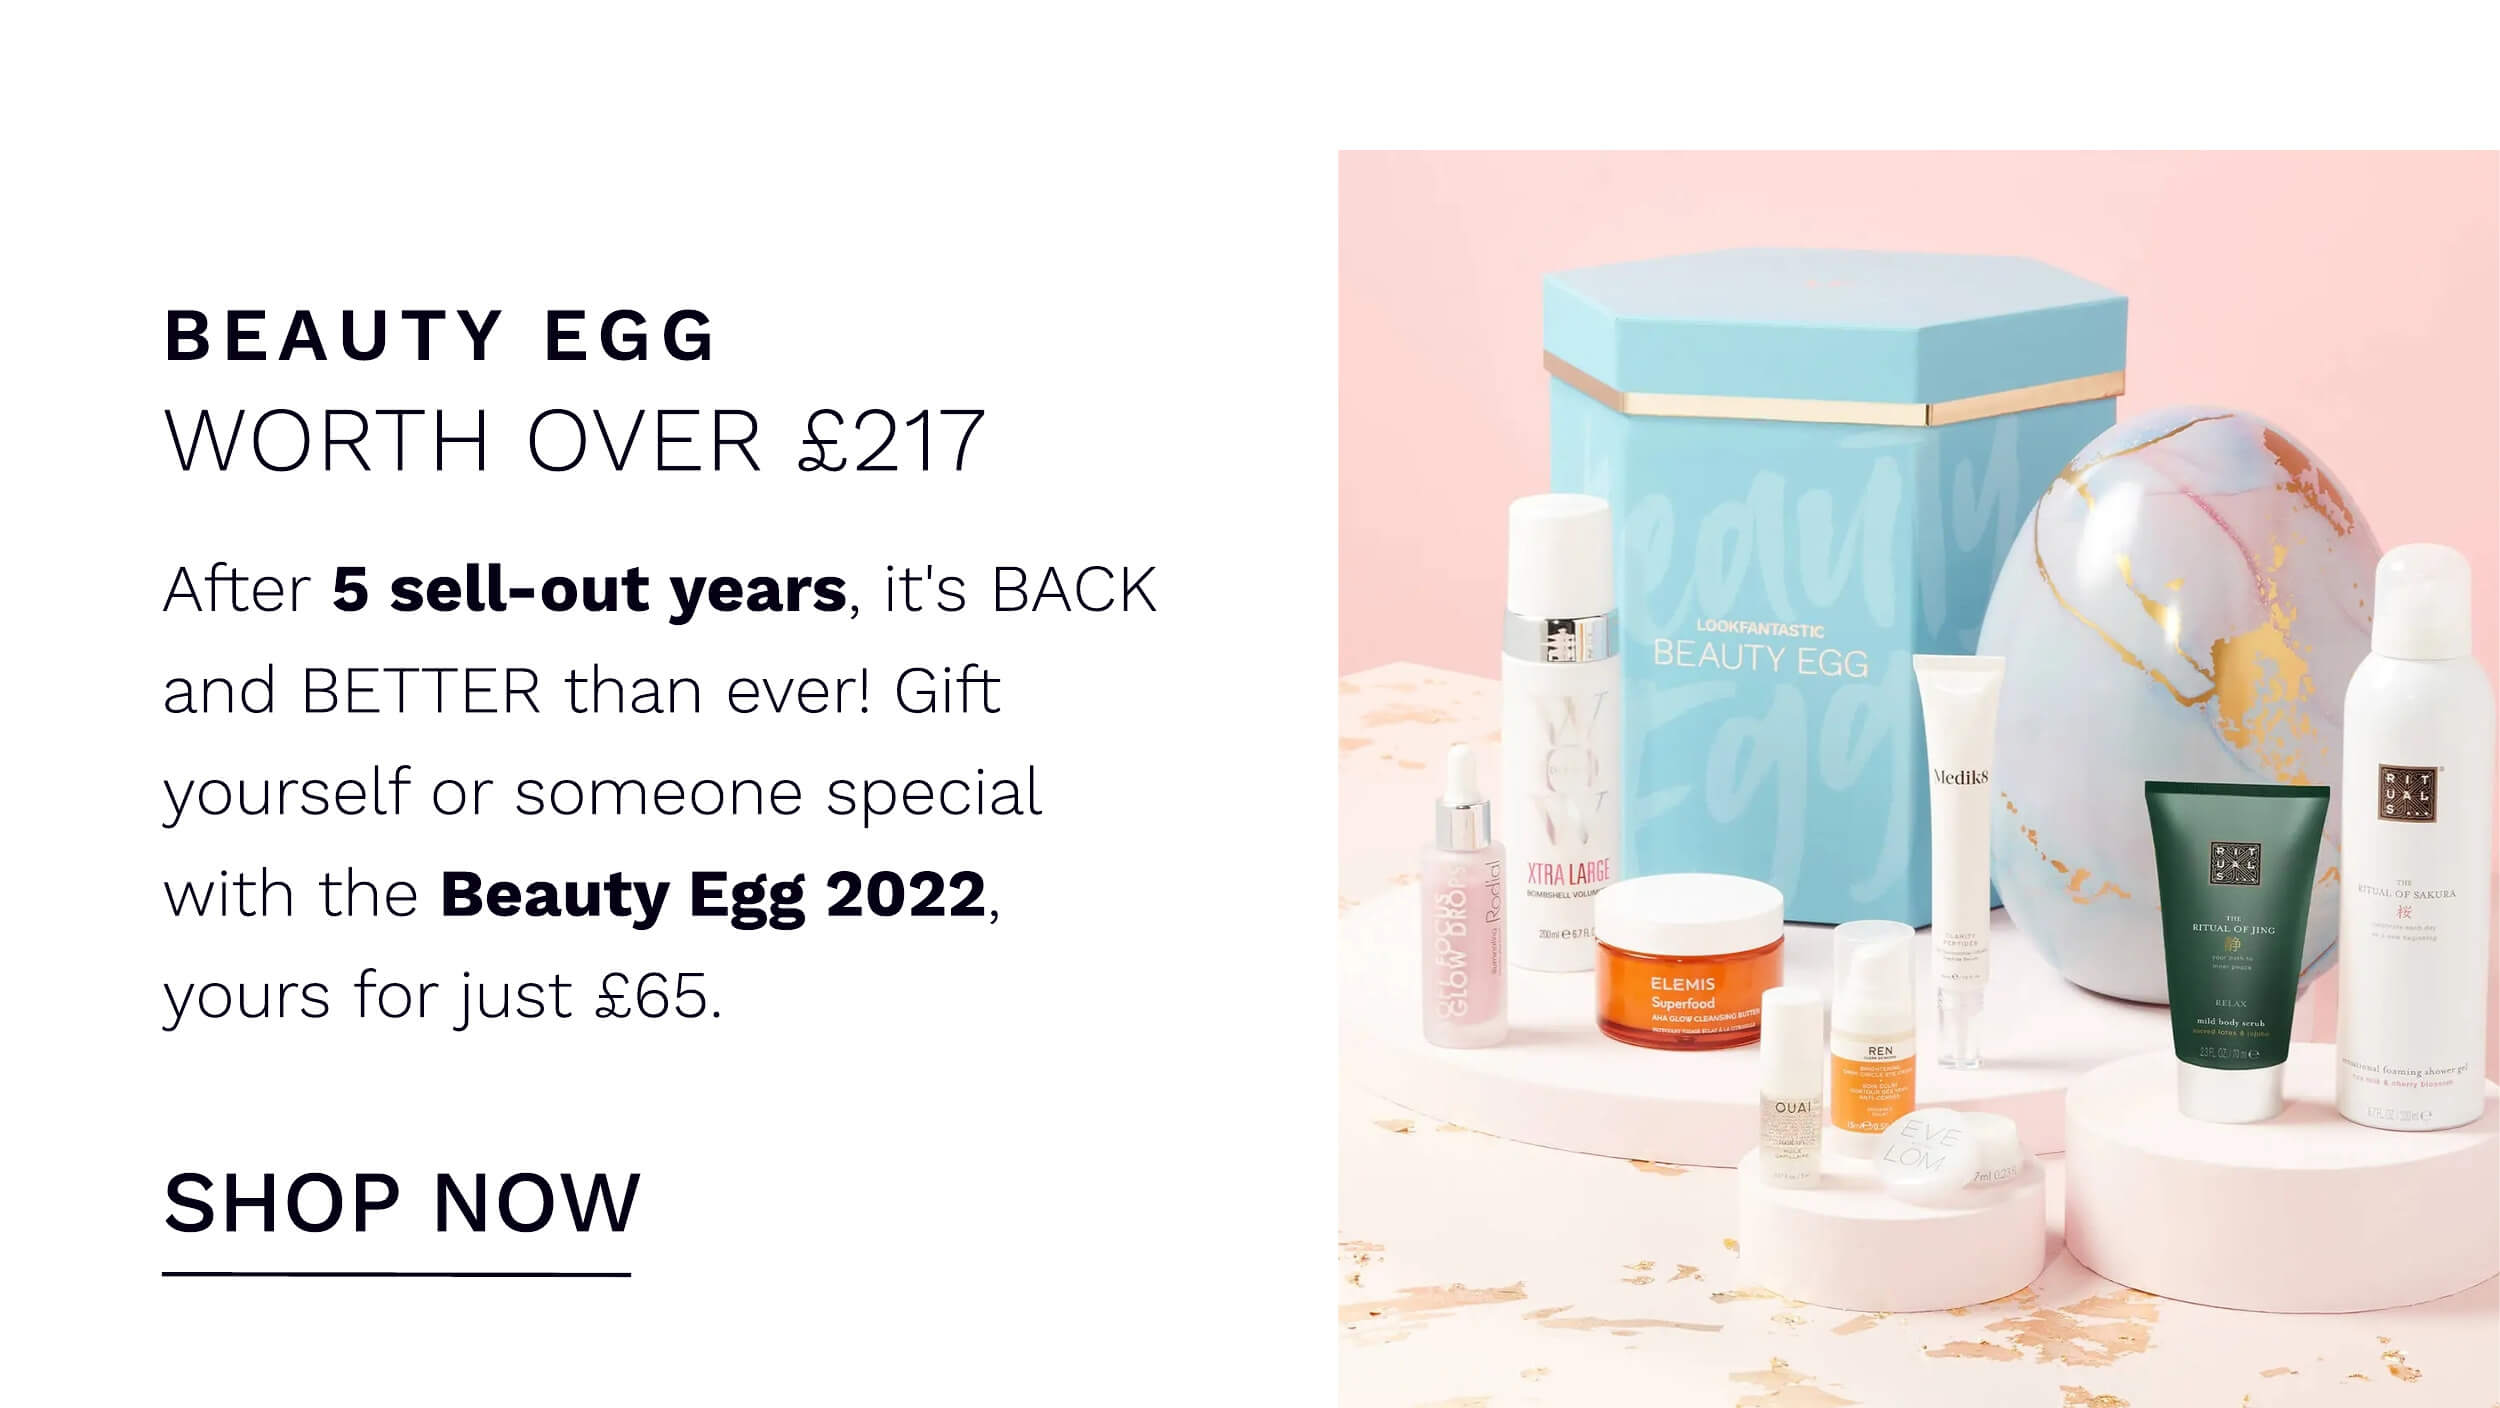 BEAUTY EGG IS BACK WORTH OVER 217